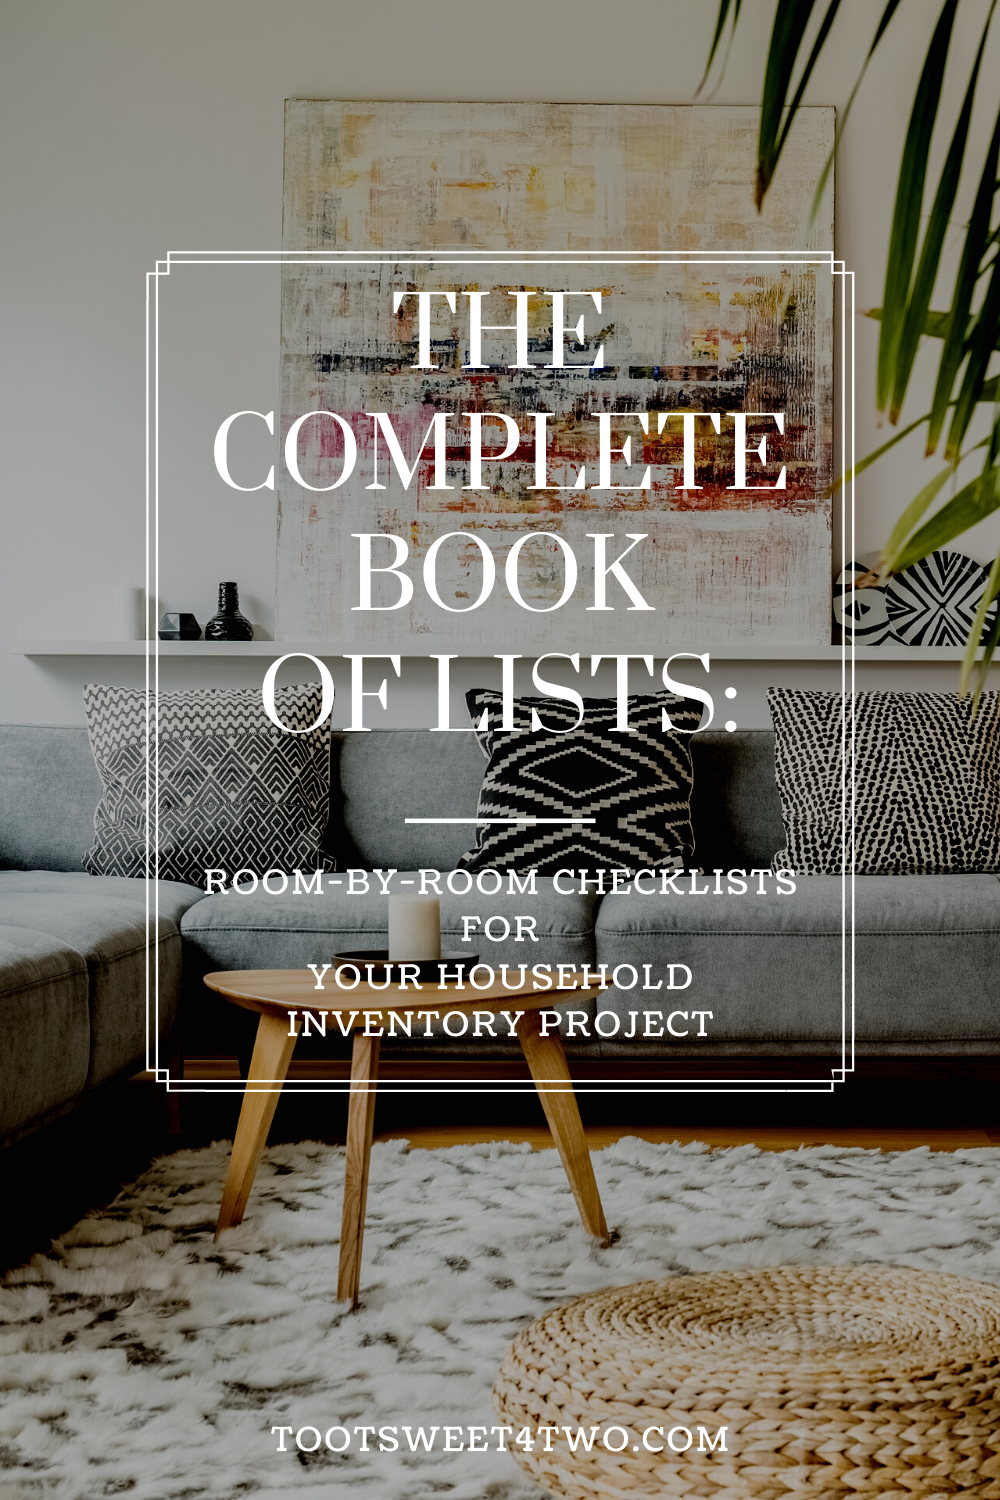 eBook containing home inventory lists for each area of your home. Perfect for pre/post-emergency.